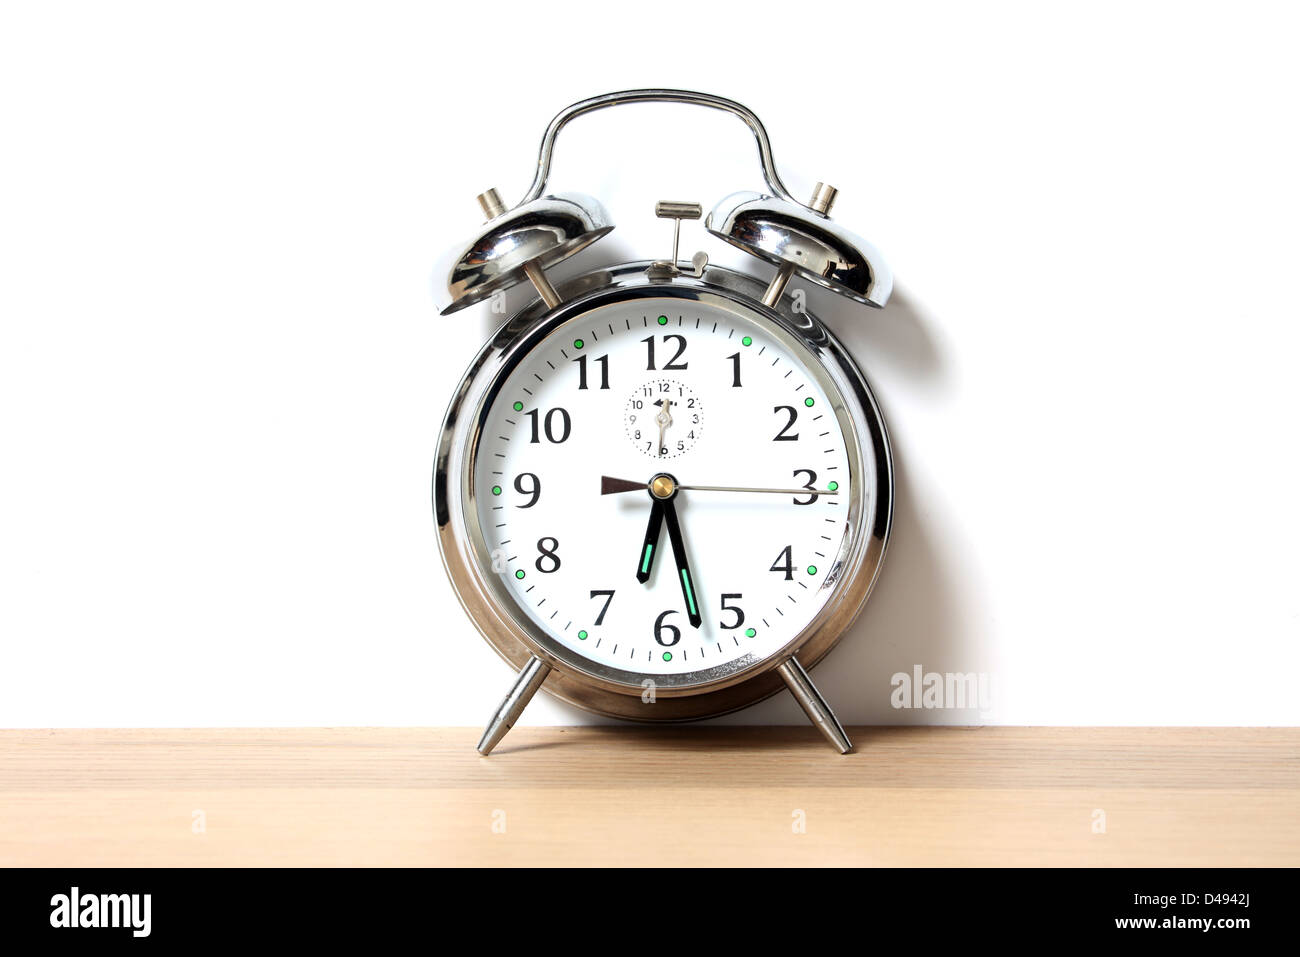 Chrome alarm clock with bells on, set just before 6-30 Stock Photo